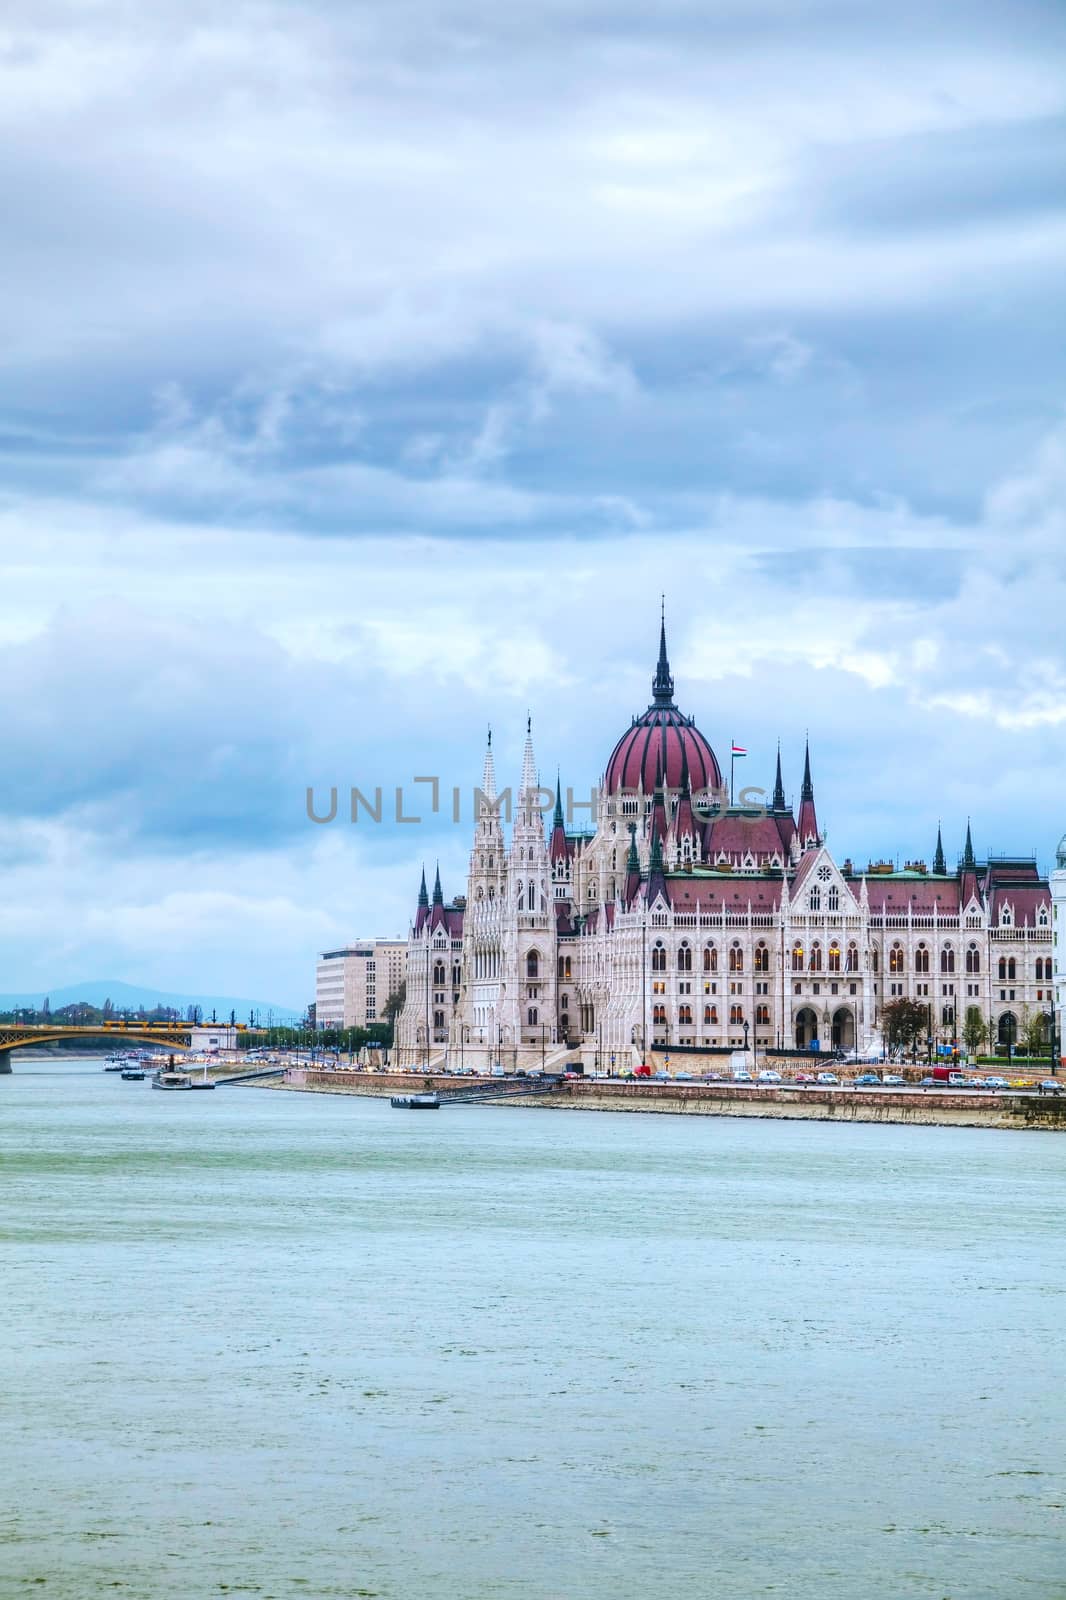 Parliament building in Budapest, Hungary by AndreyKr